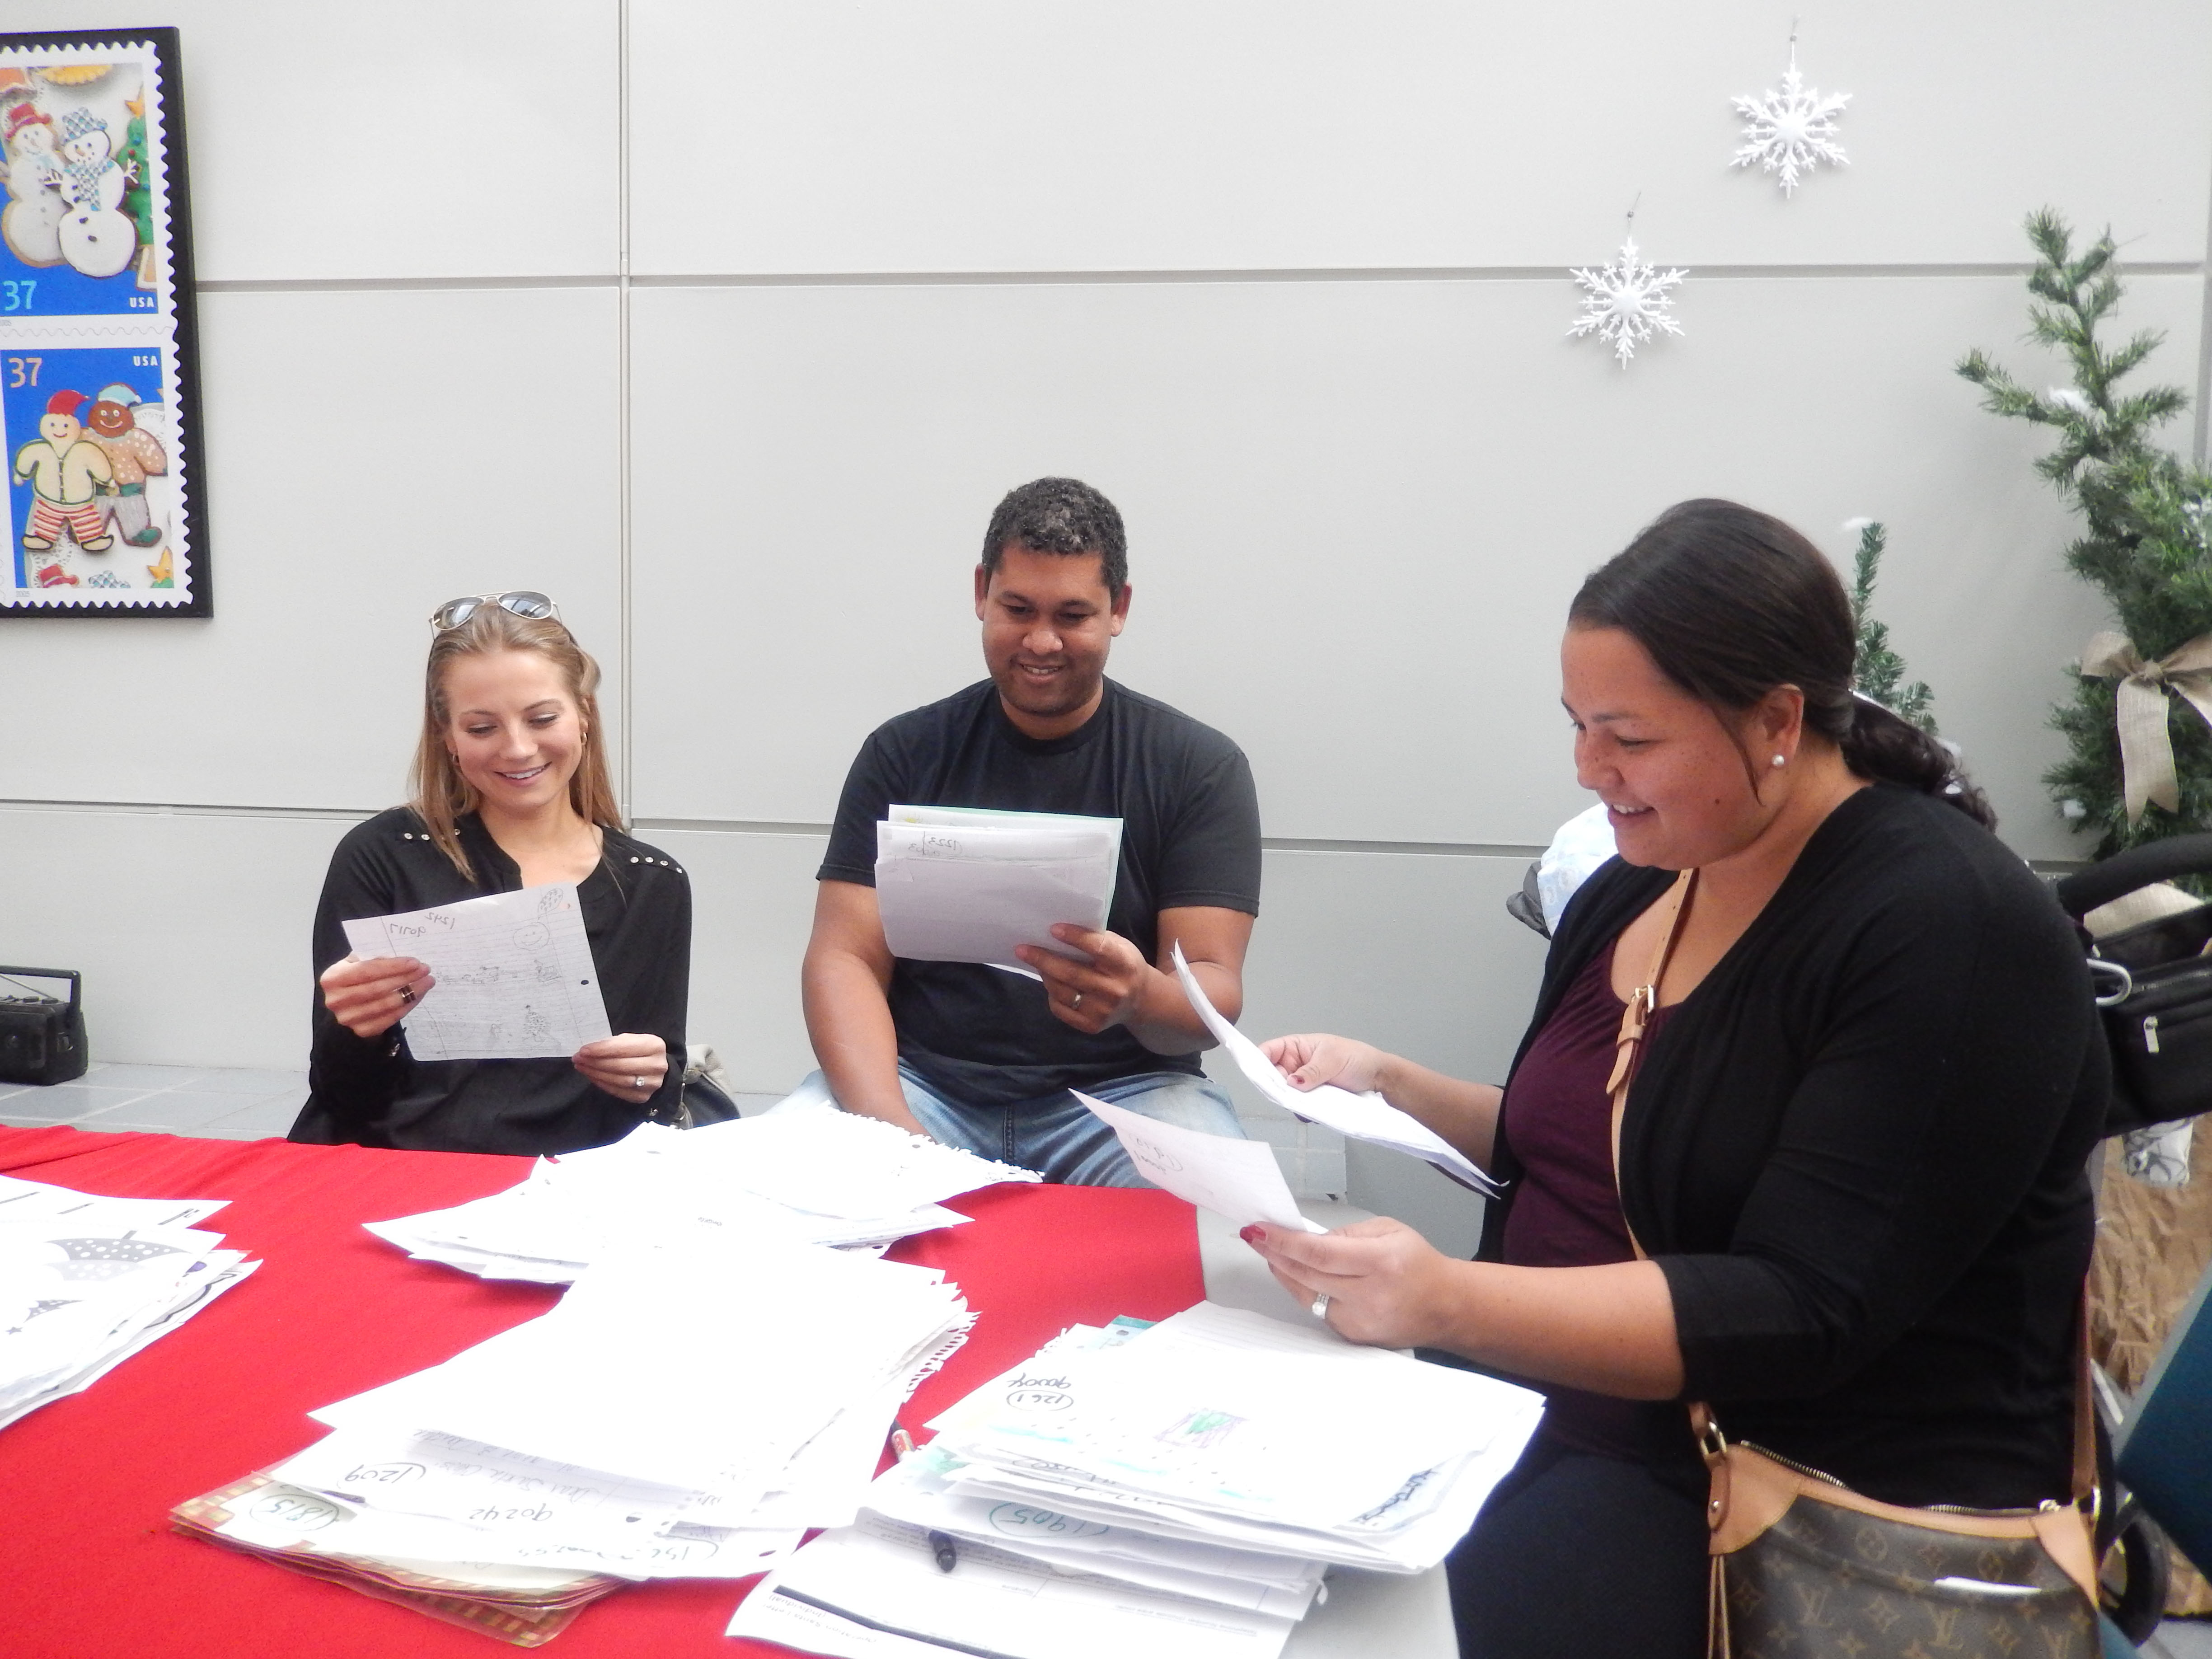 Volunteers for USPS Operation Letters to Santa reading letters.